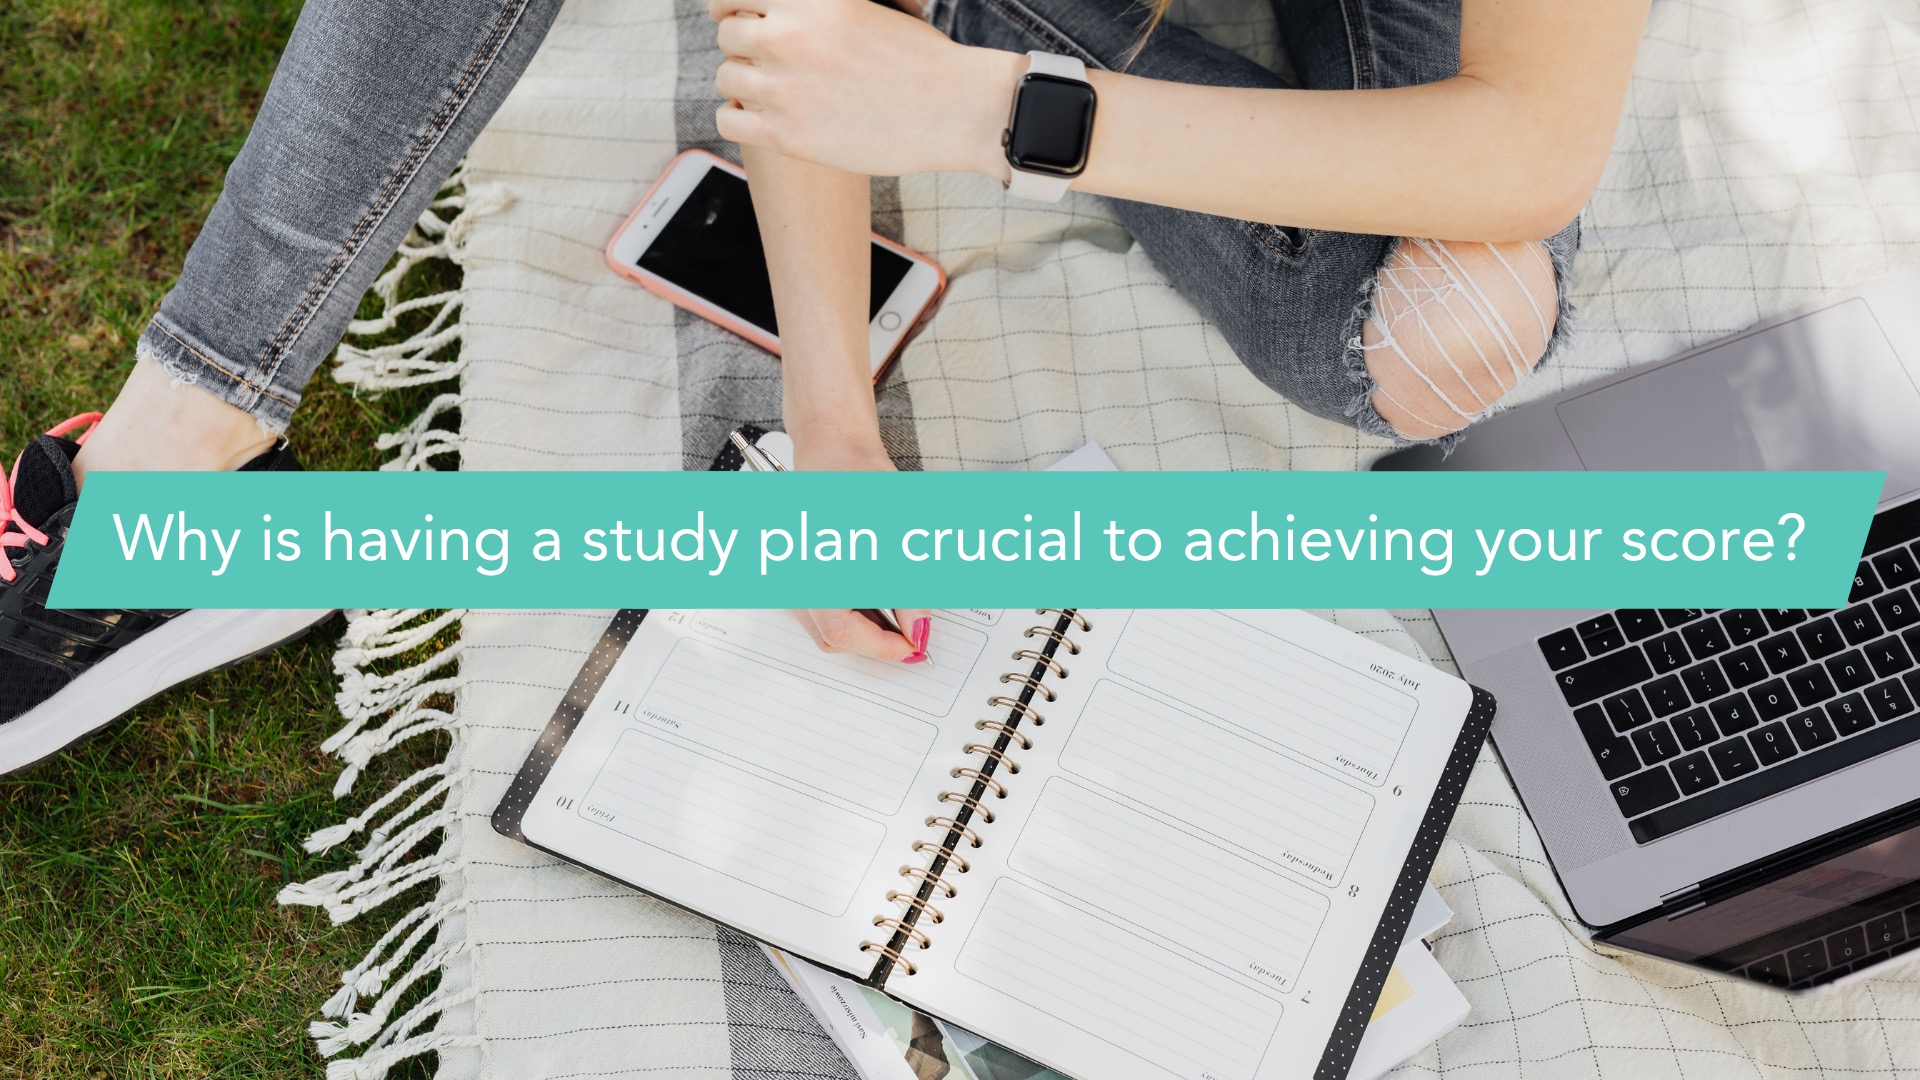 Why is having a study plan crucial to achieving your score?